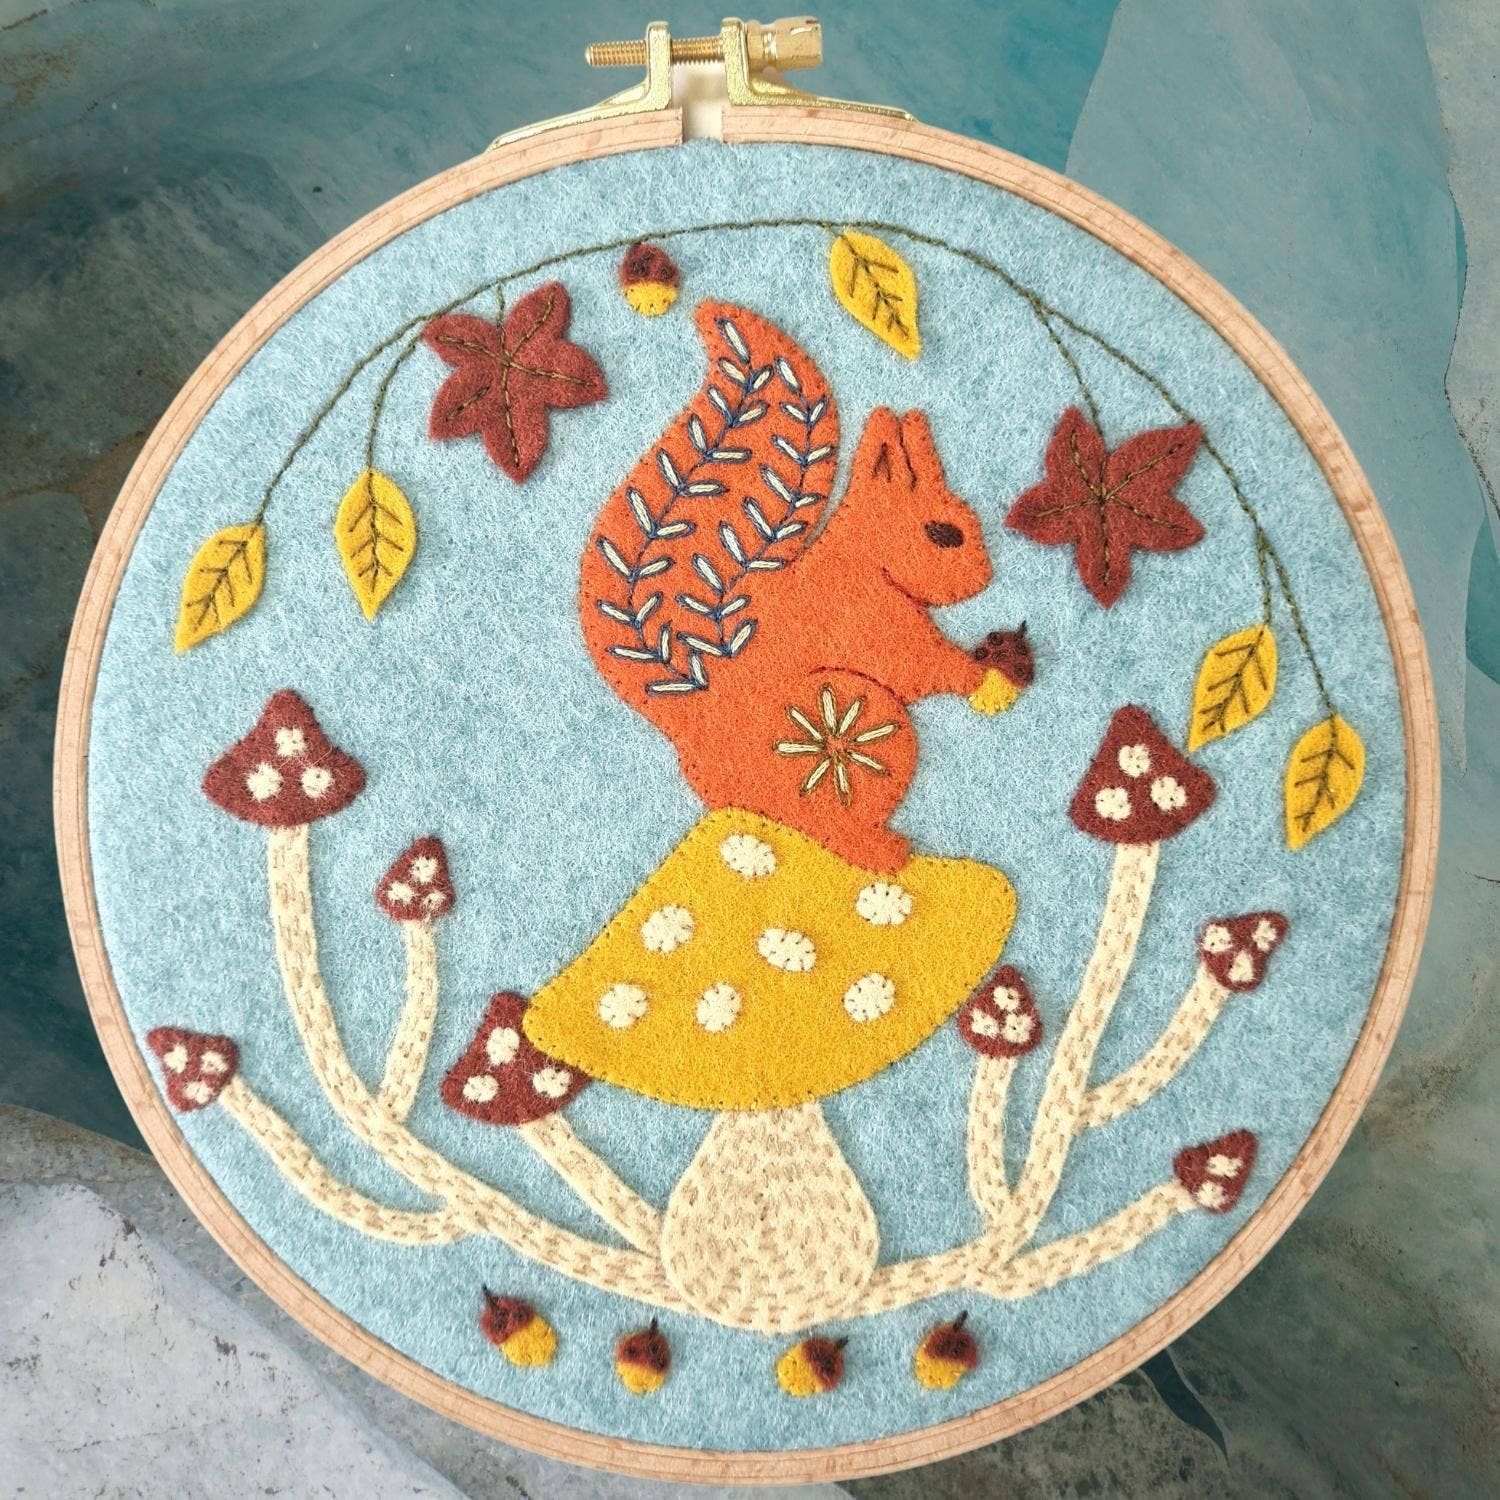 wool felt bacon and egg wall hanging in a 6 inch embroidery hoop 